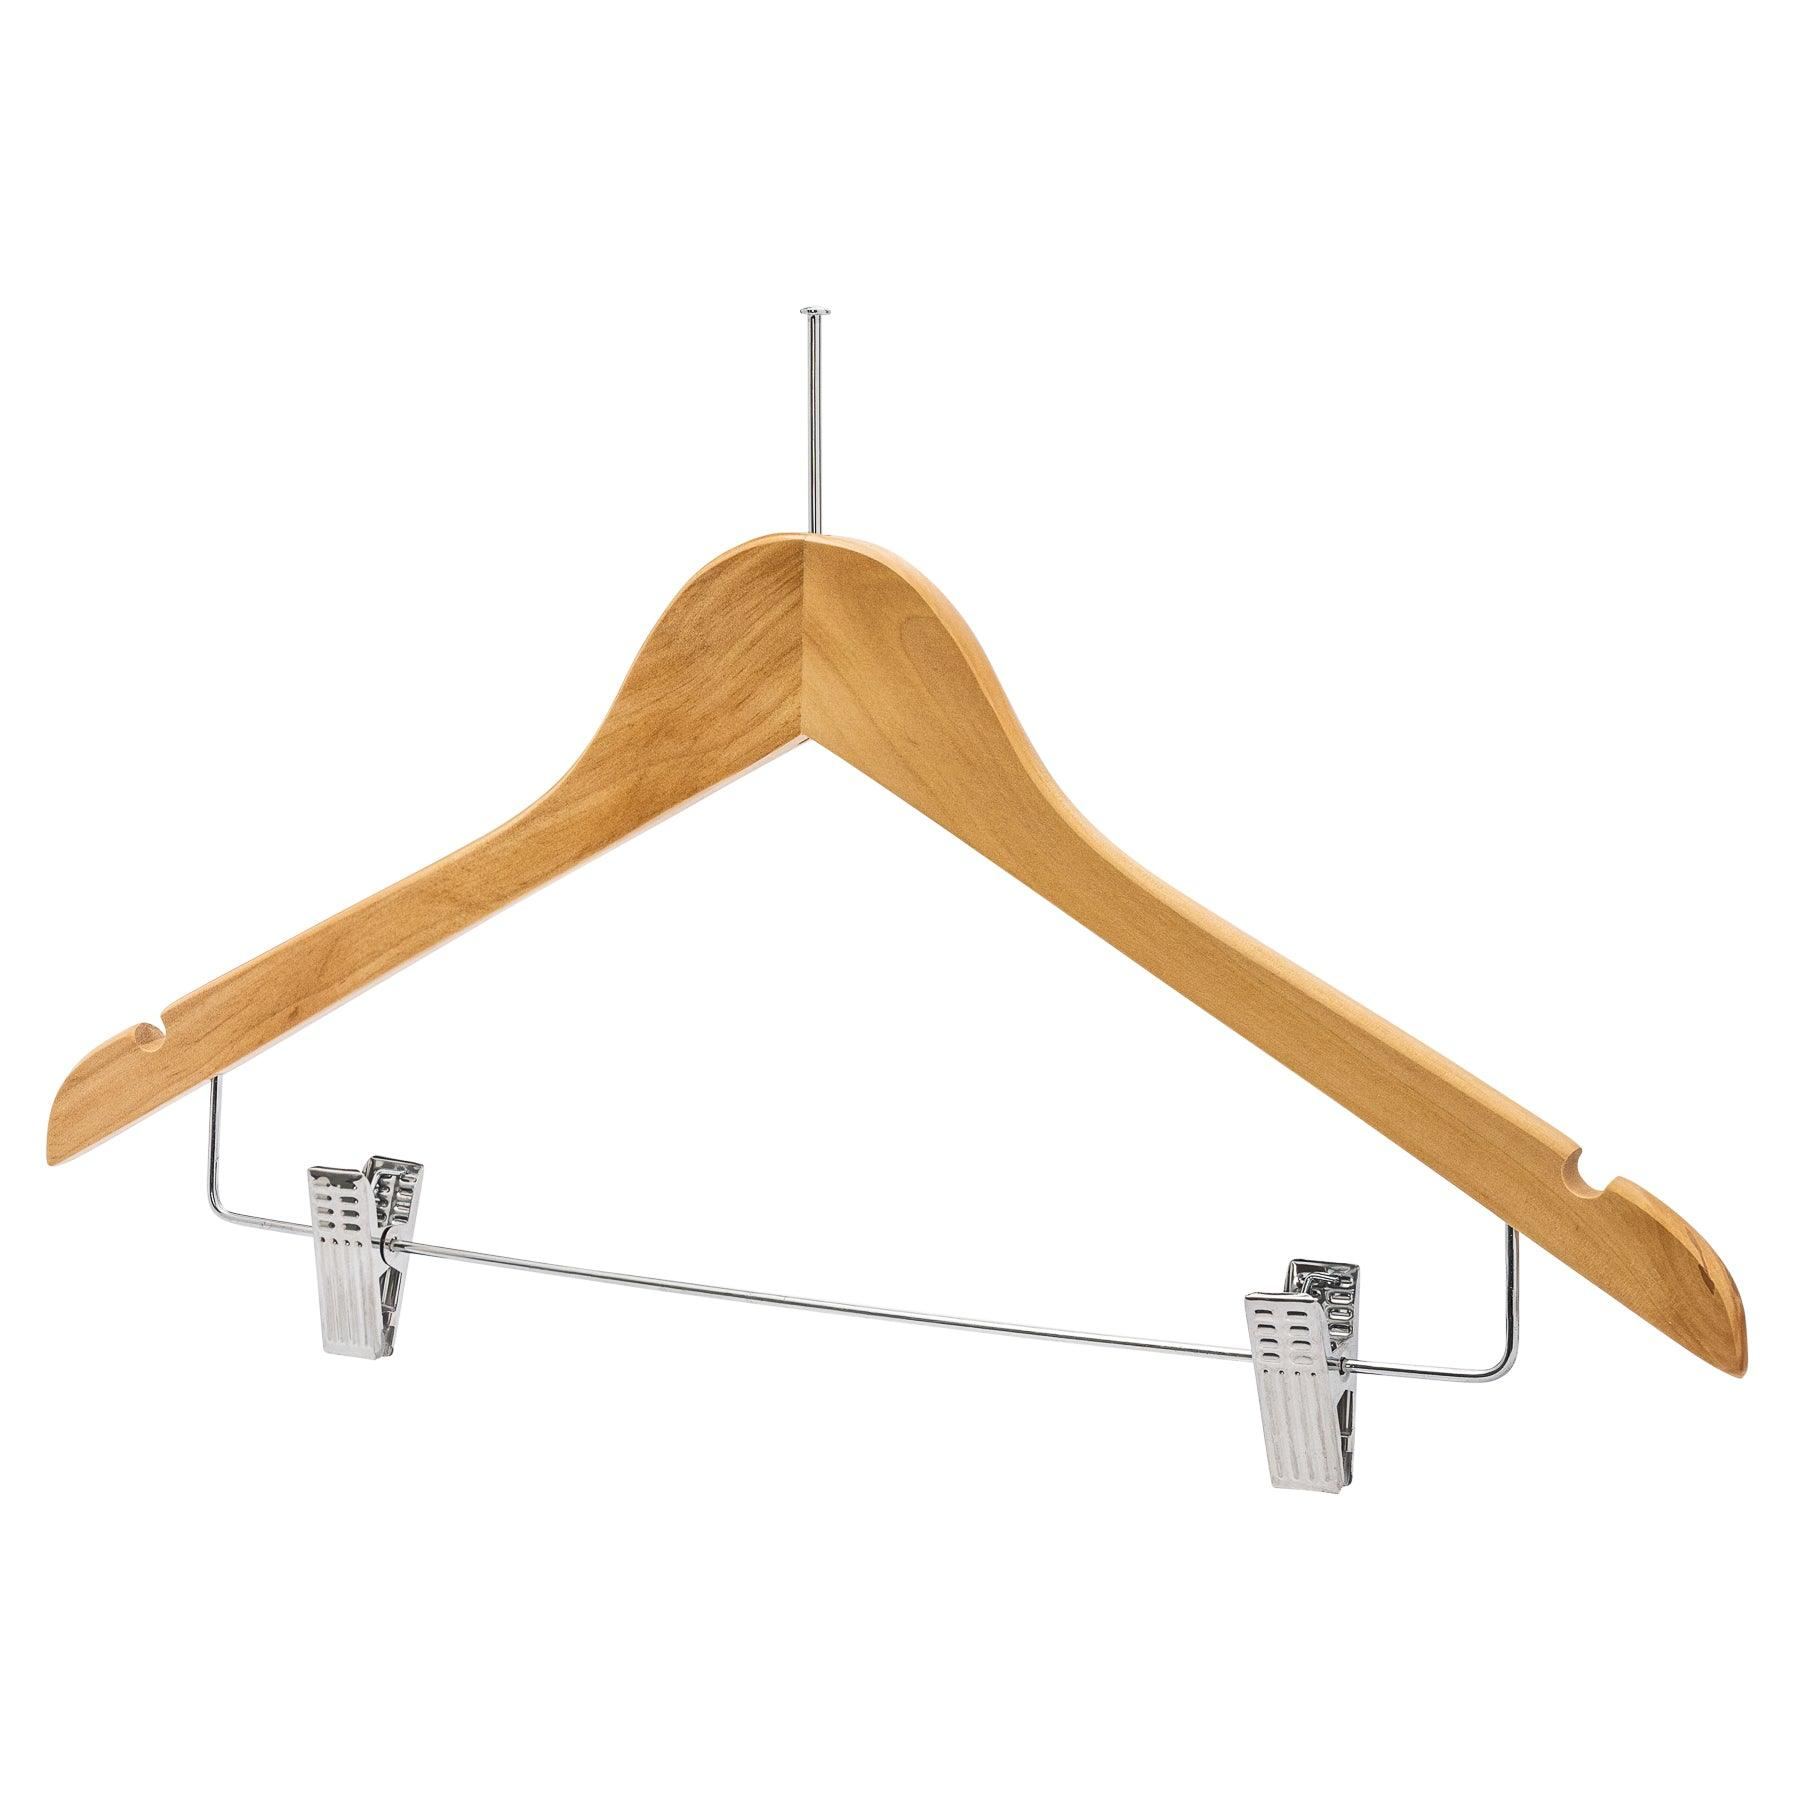 Natural Wooden Anti-Theft Hanger w/Clips - 43cm X 12mm thick  (Sold in 25/50/100) - Hangersforless